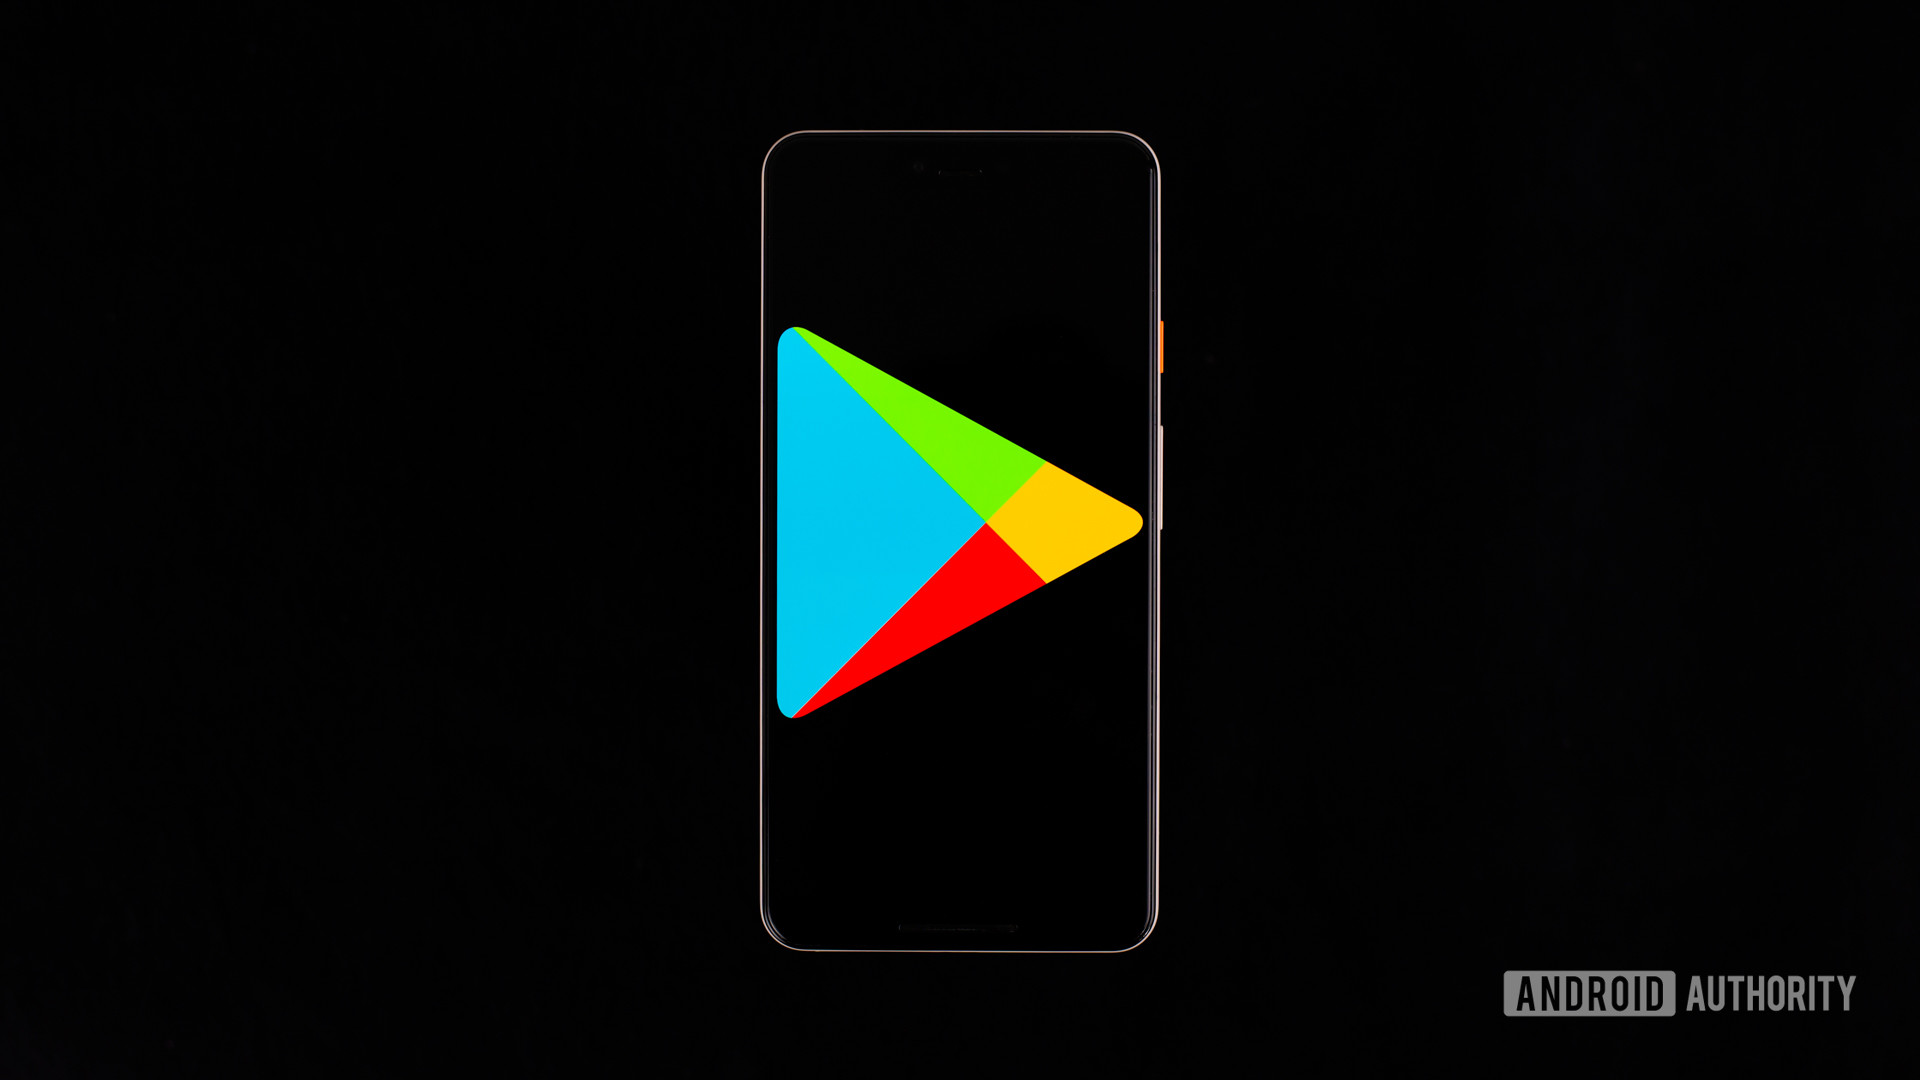 Google Play Store on smartphone stock photo 1 - The best Android wallpapers